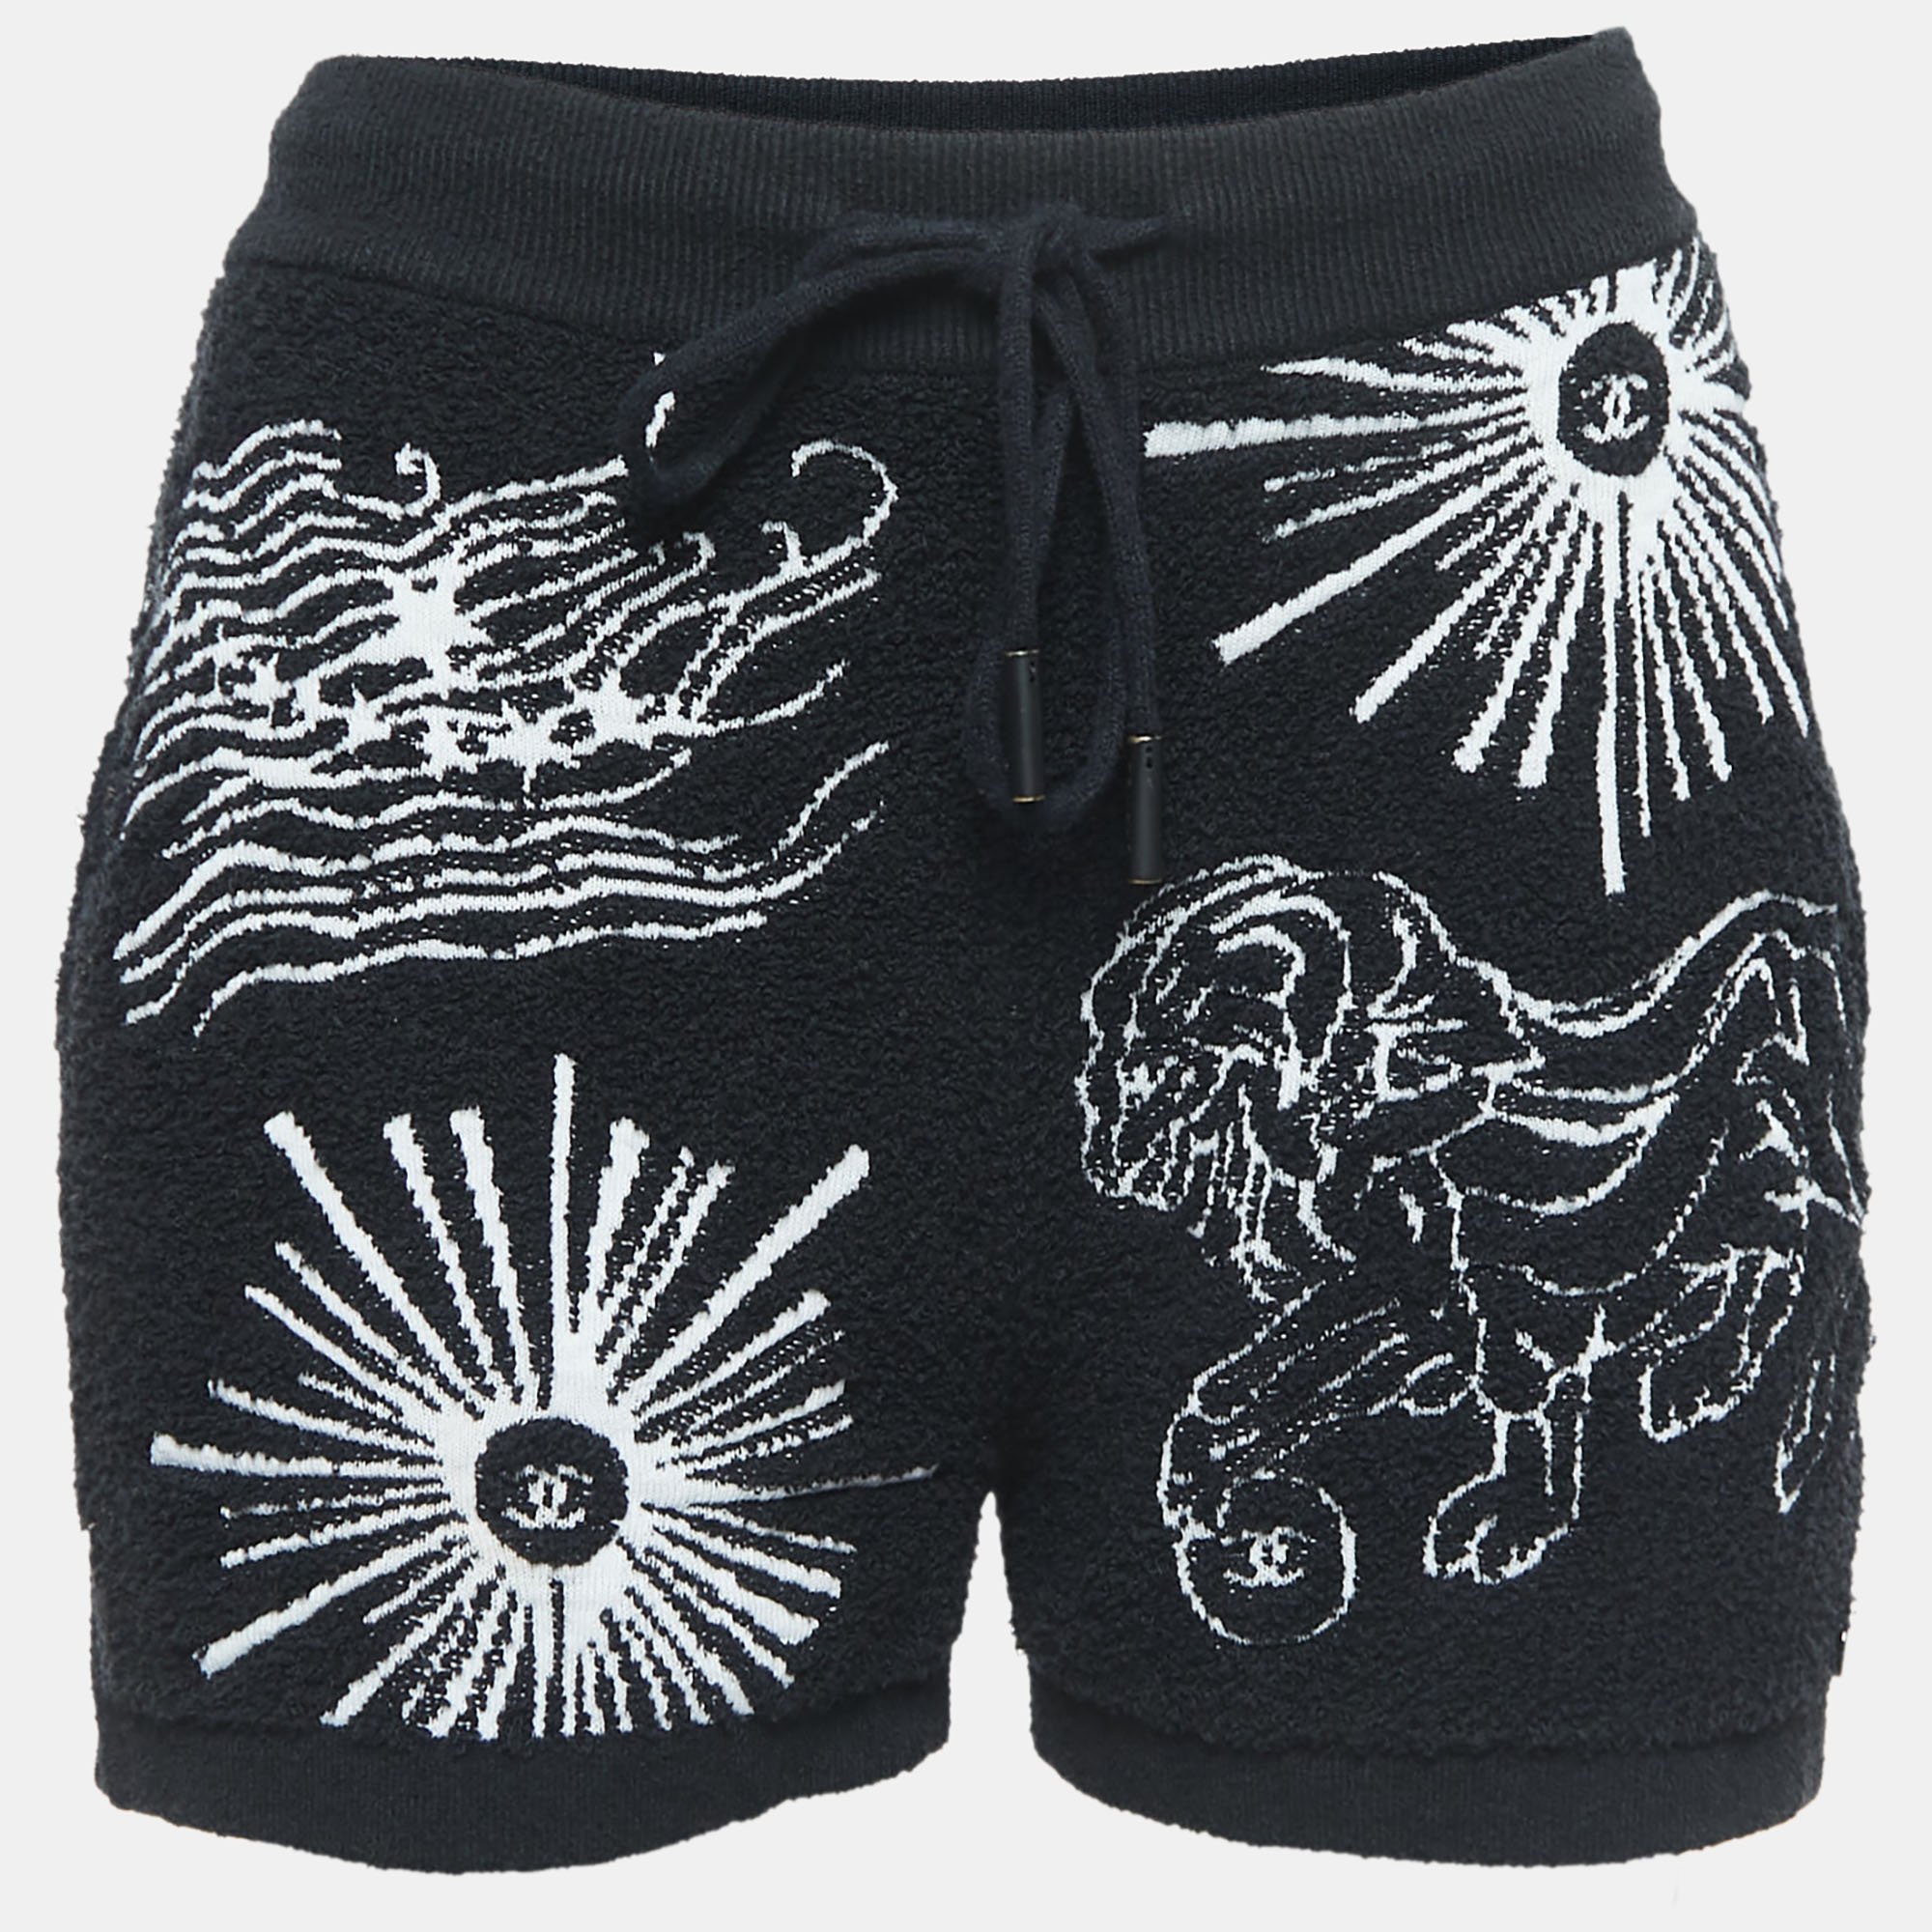 Chanel Black Patterned Terry Cotton Shorts S